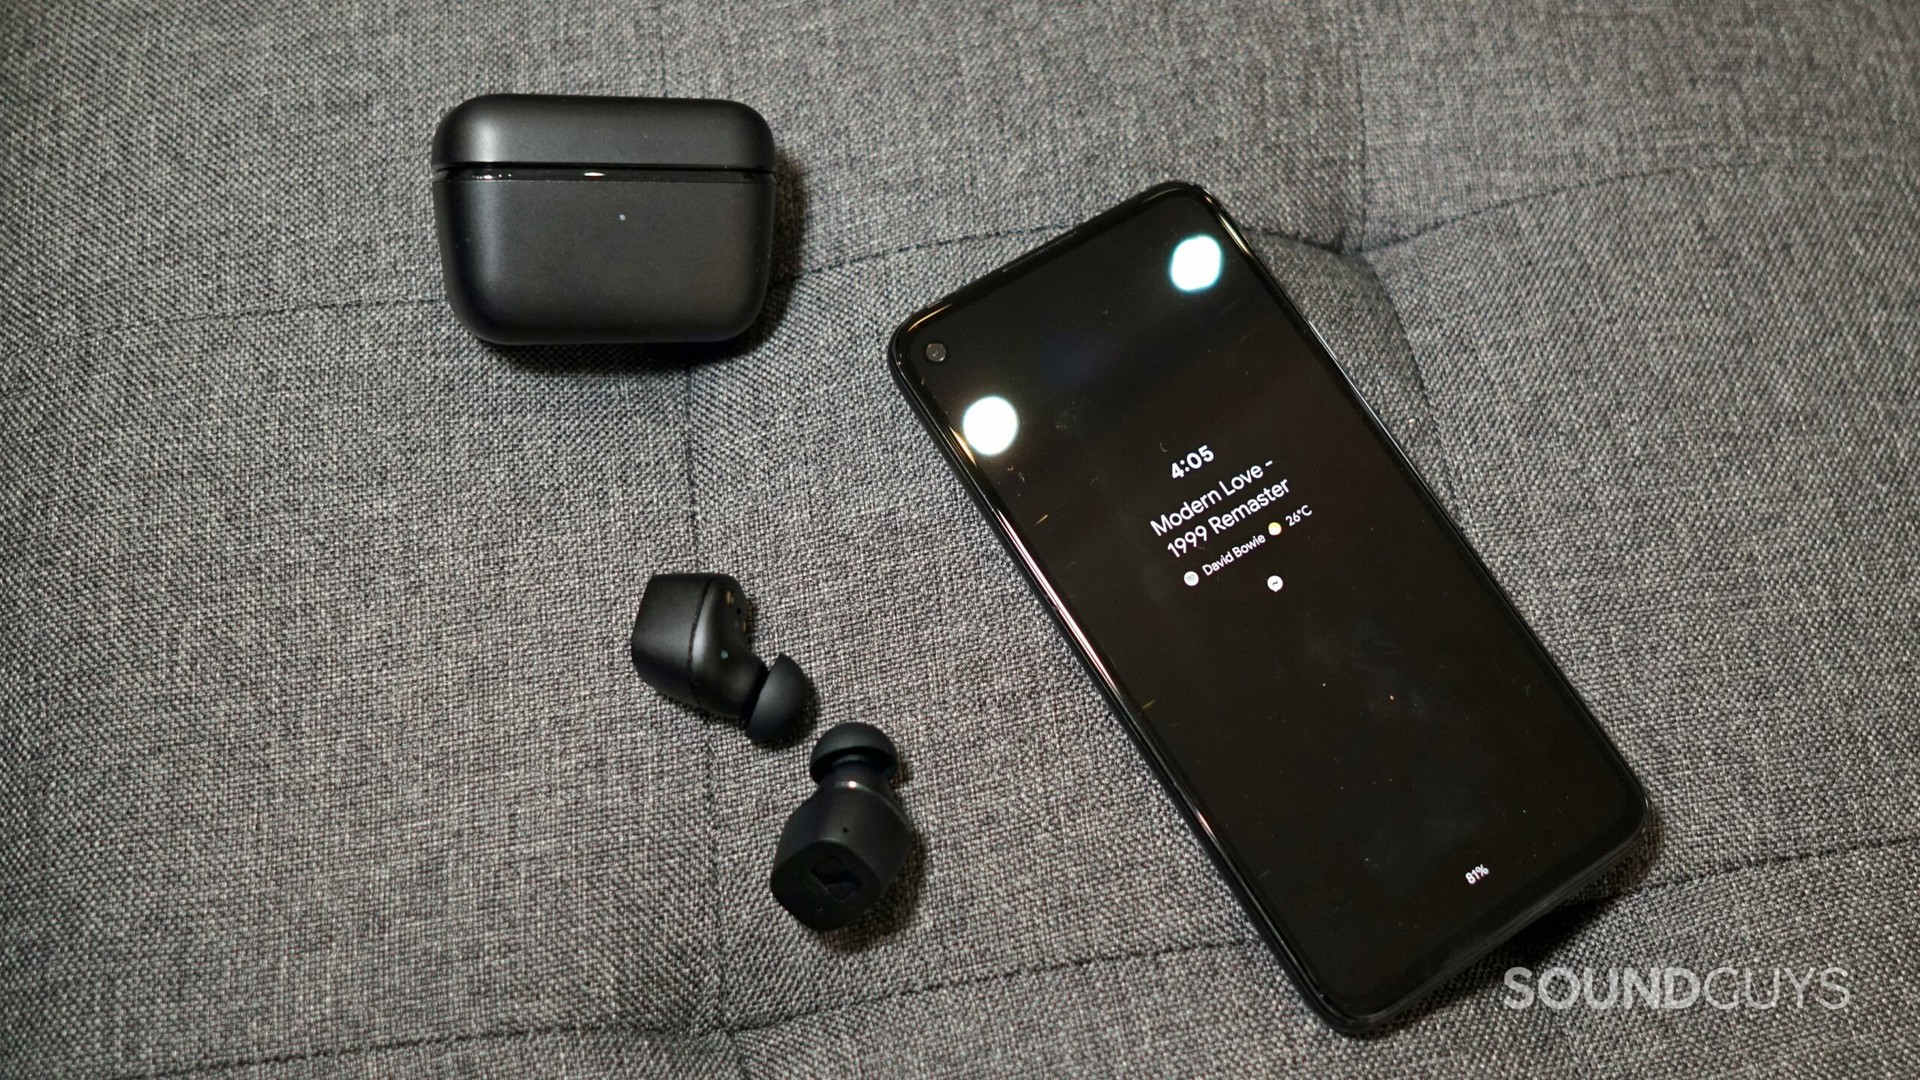 Sennheiser CX True Wireless earbuds and case next to a phone.